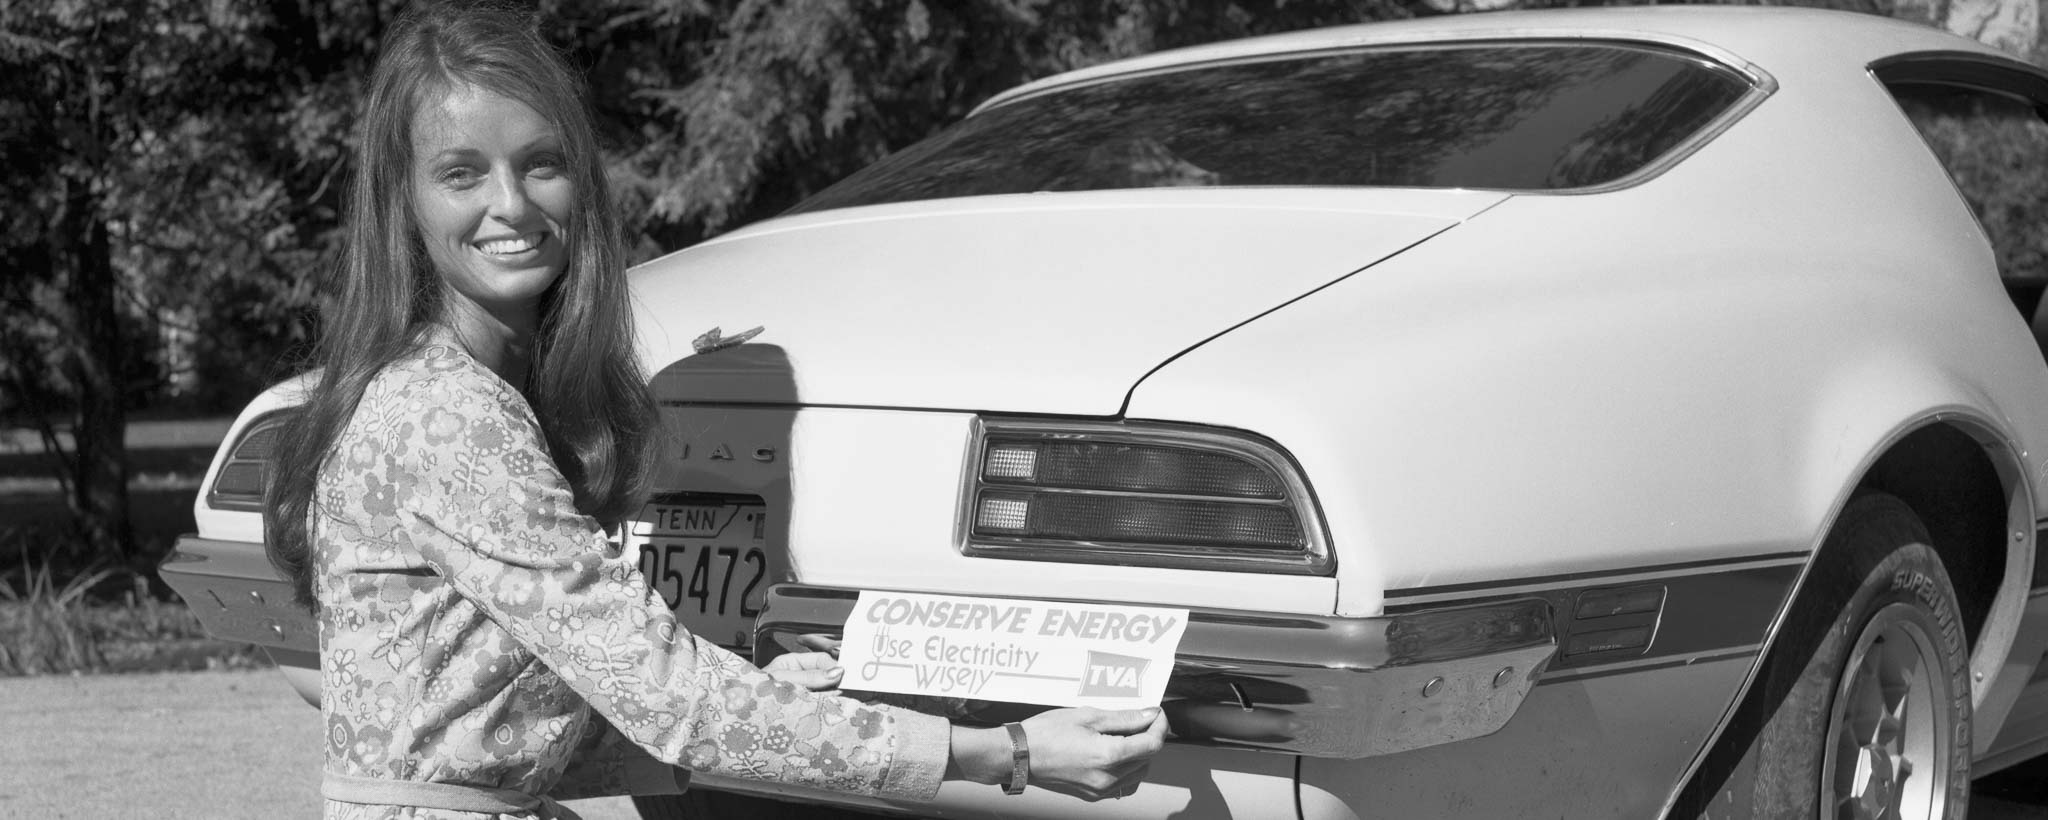 woman putting on a "Conserve Energy" bumper sticker